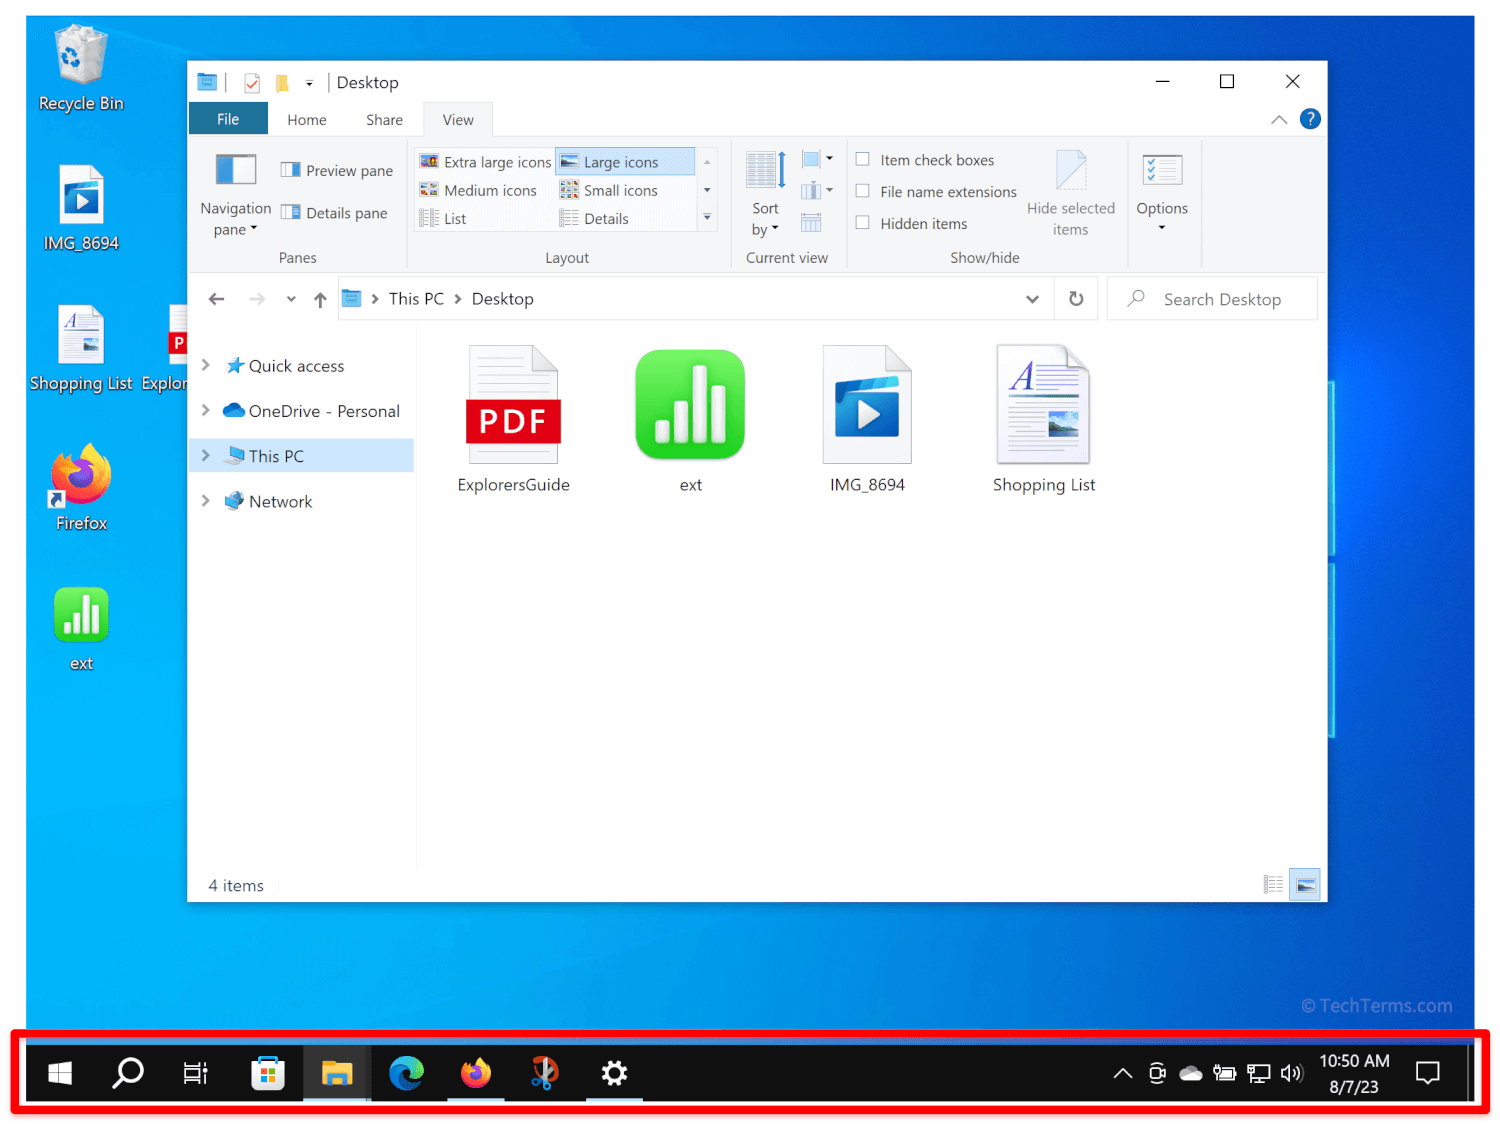 The Windows 10 taskbar with several open and pinned application icons